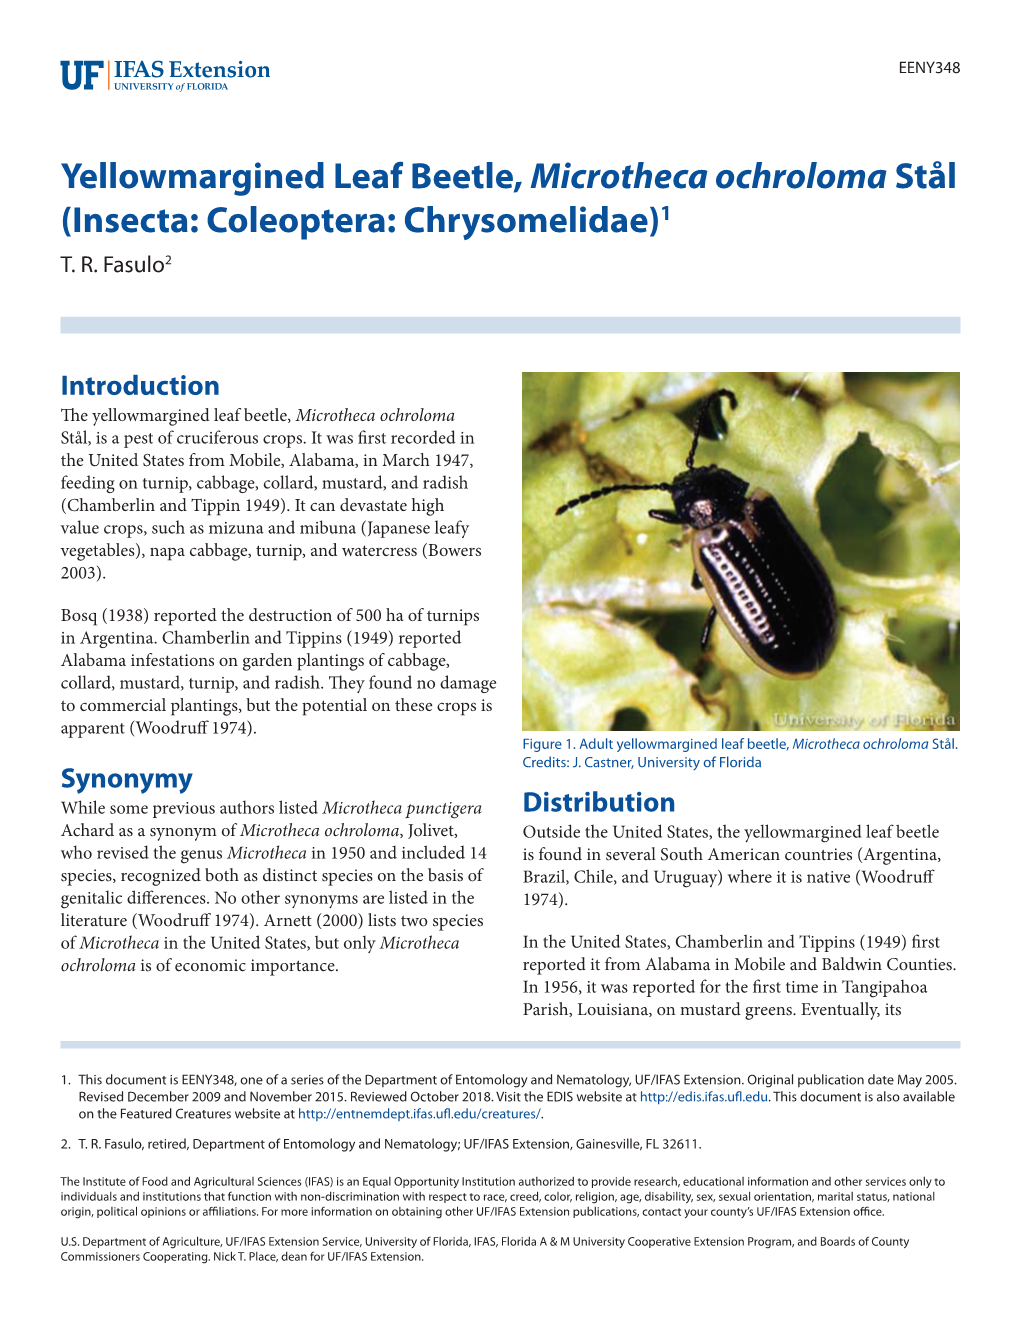 Yellowmargined Leaf Beetle, Microtheca Ochroloma Stål (Insecta: Coleoptera: Chrysomelidae)1 T